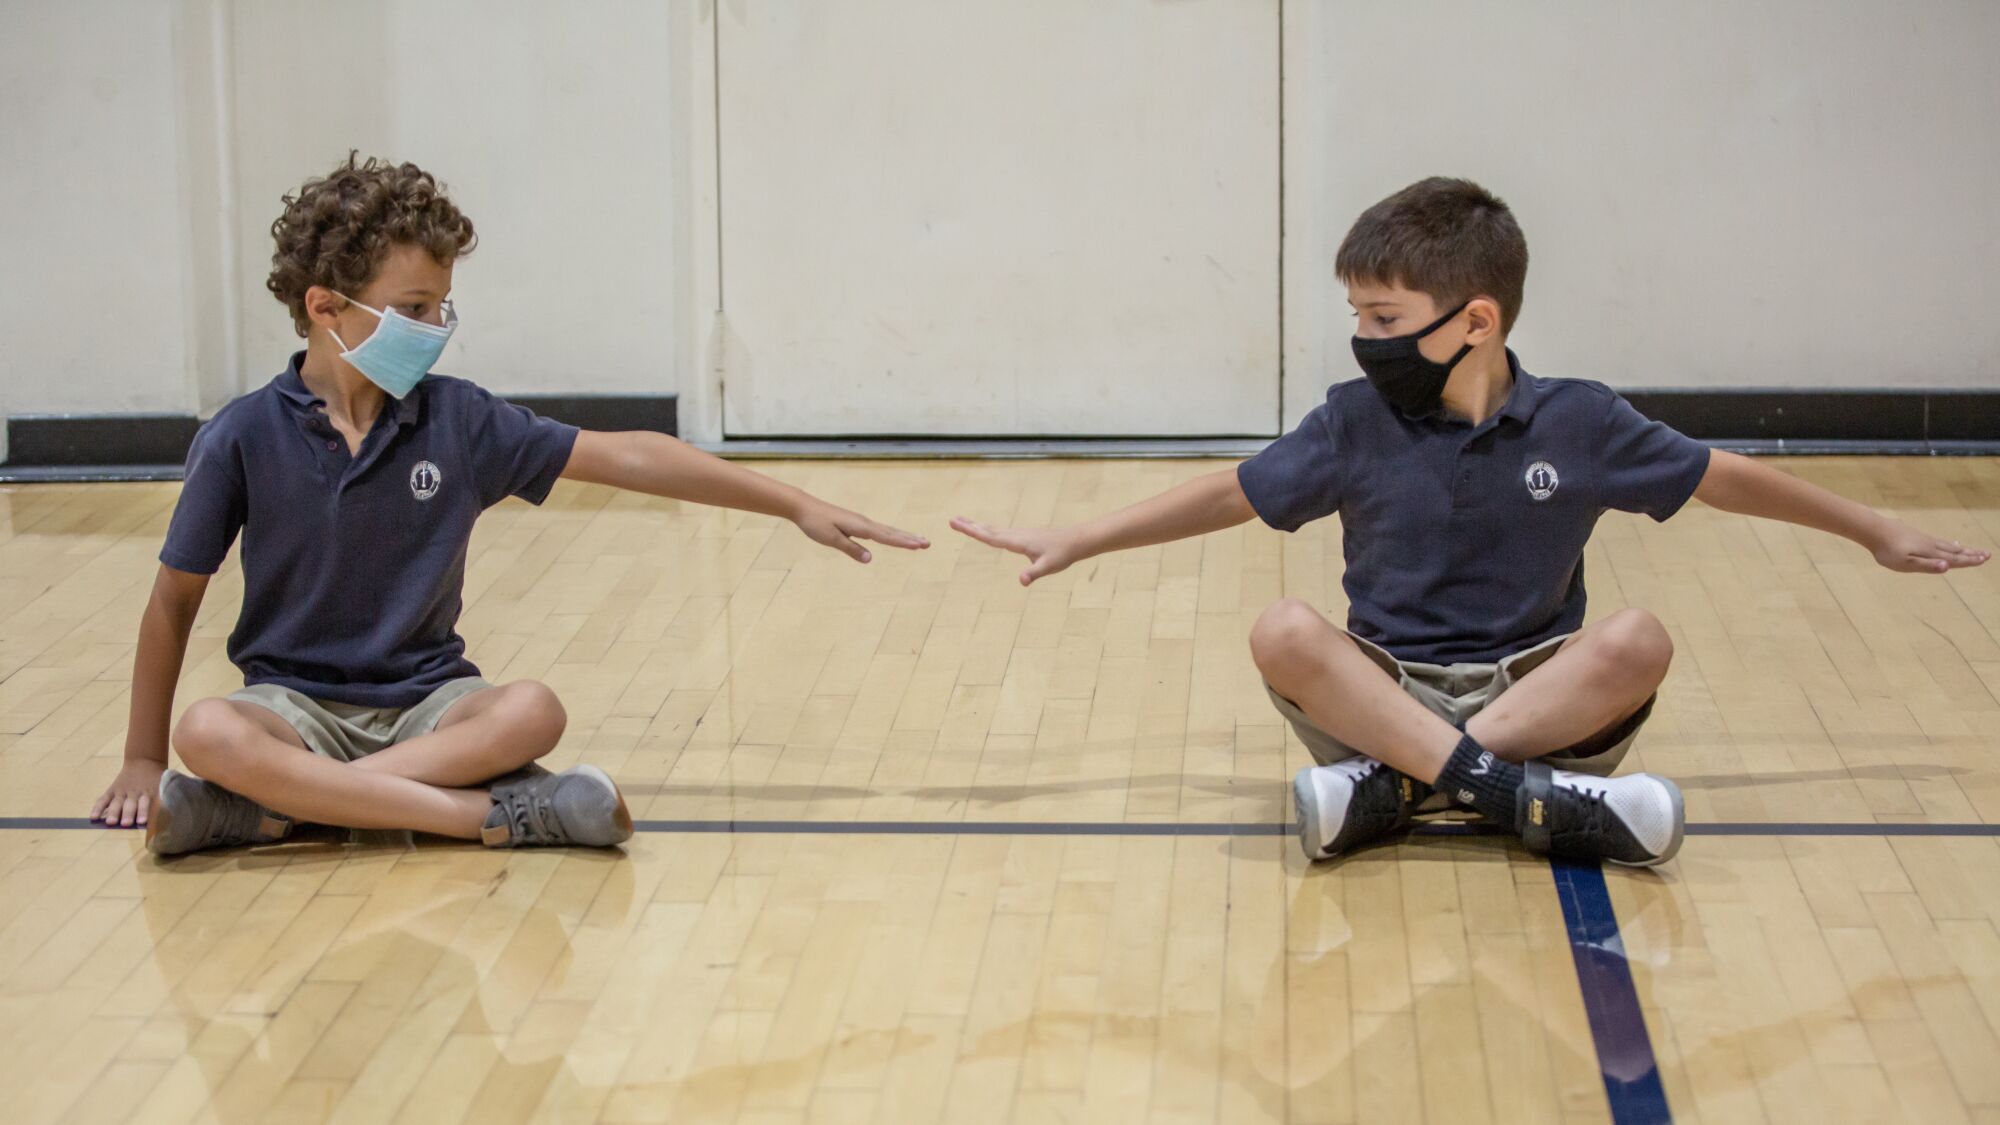 Second graders at Christian Unified, Nick and Liam, measure their distance during gym class. 